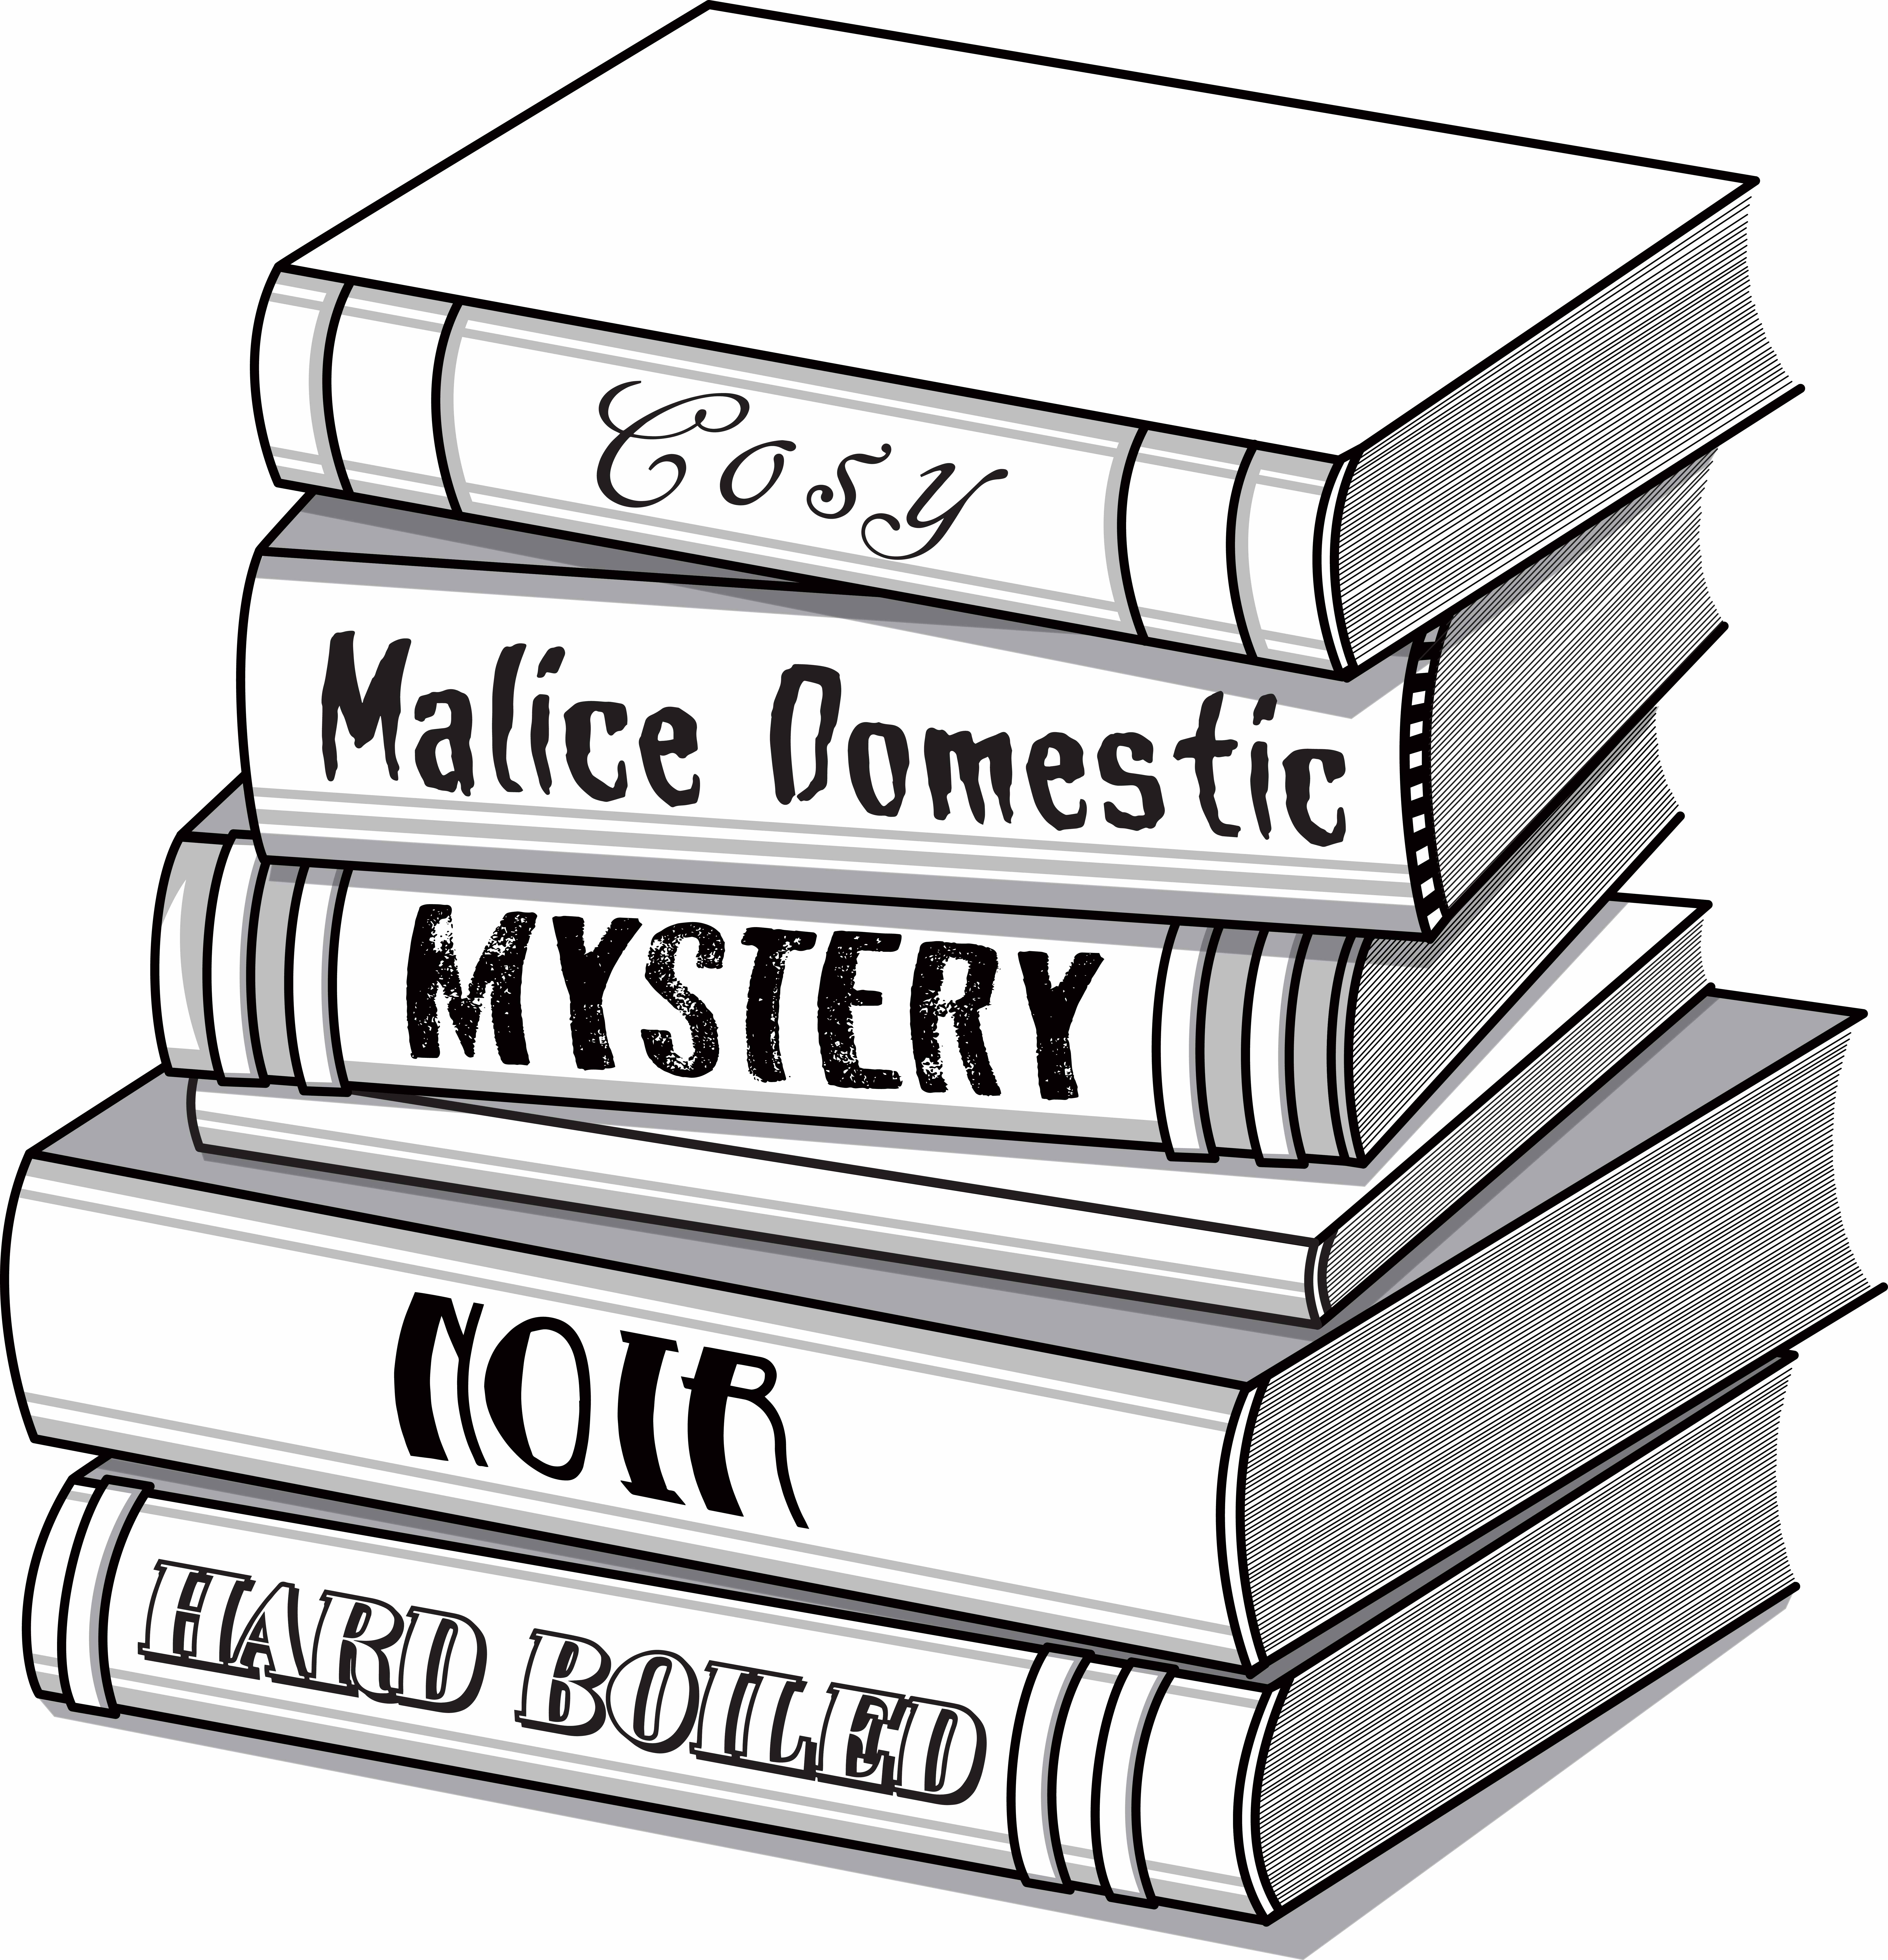 Hand drawn pile of sub-genre books: Cosy, Malice Domestic, Mystery, Noir and Hard Boiled